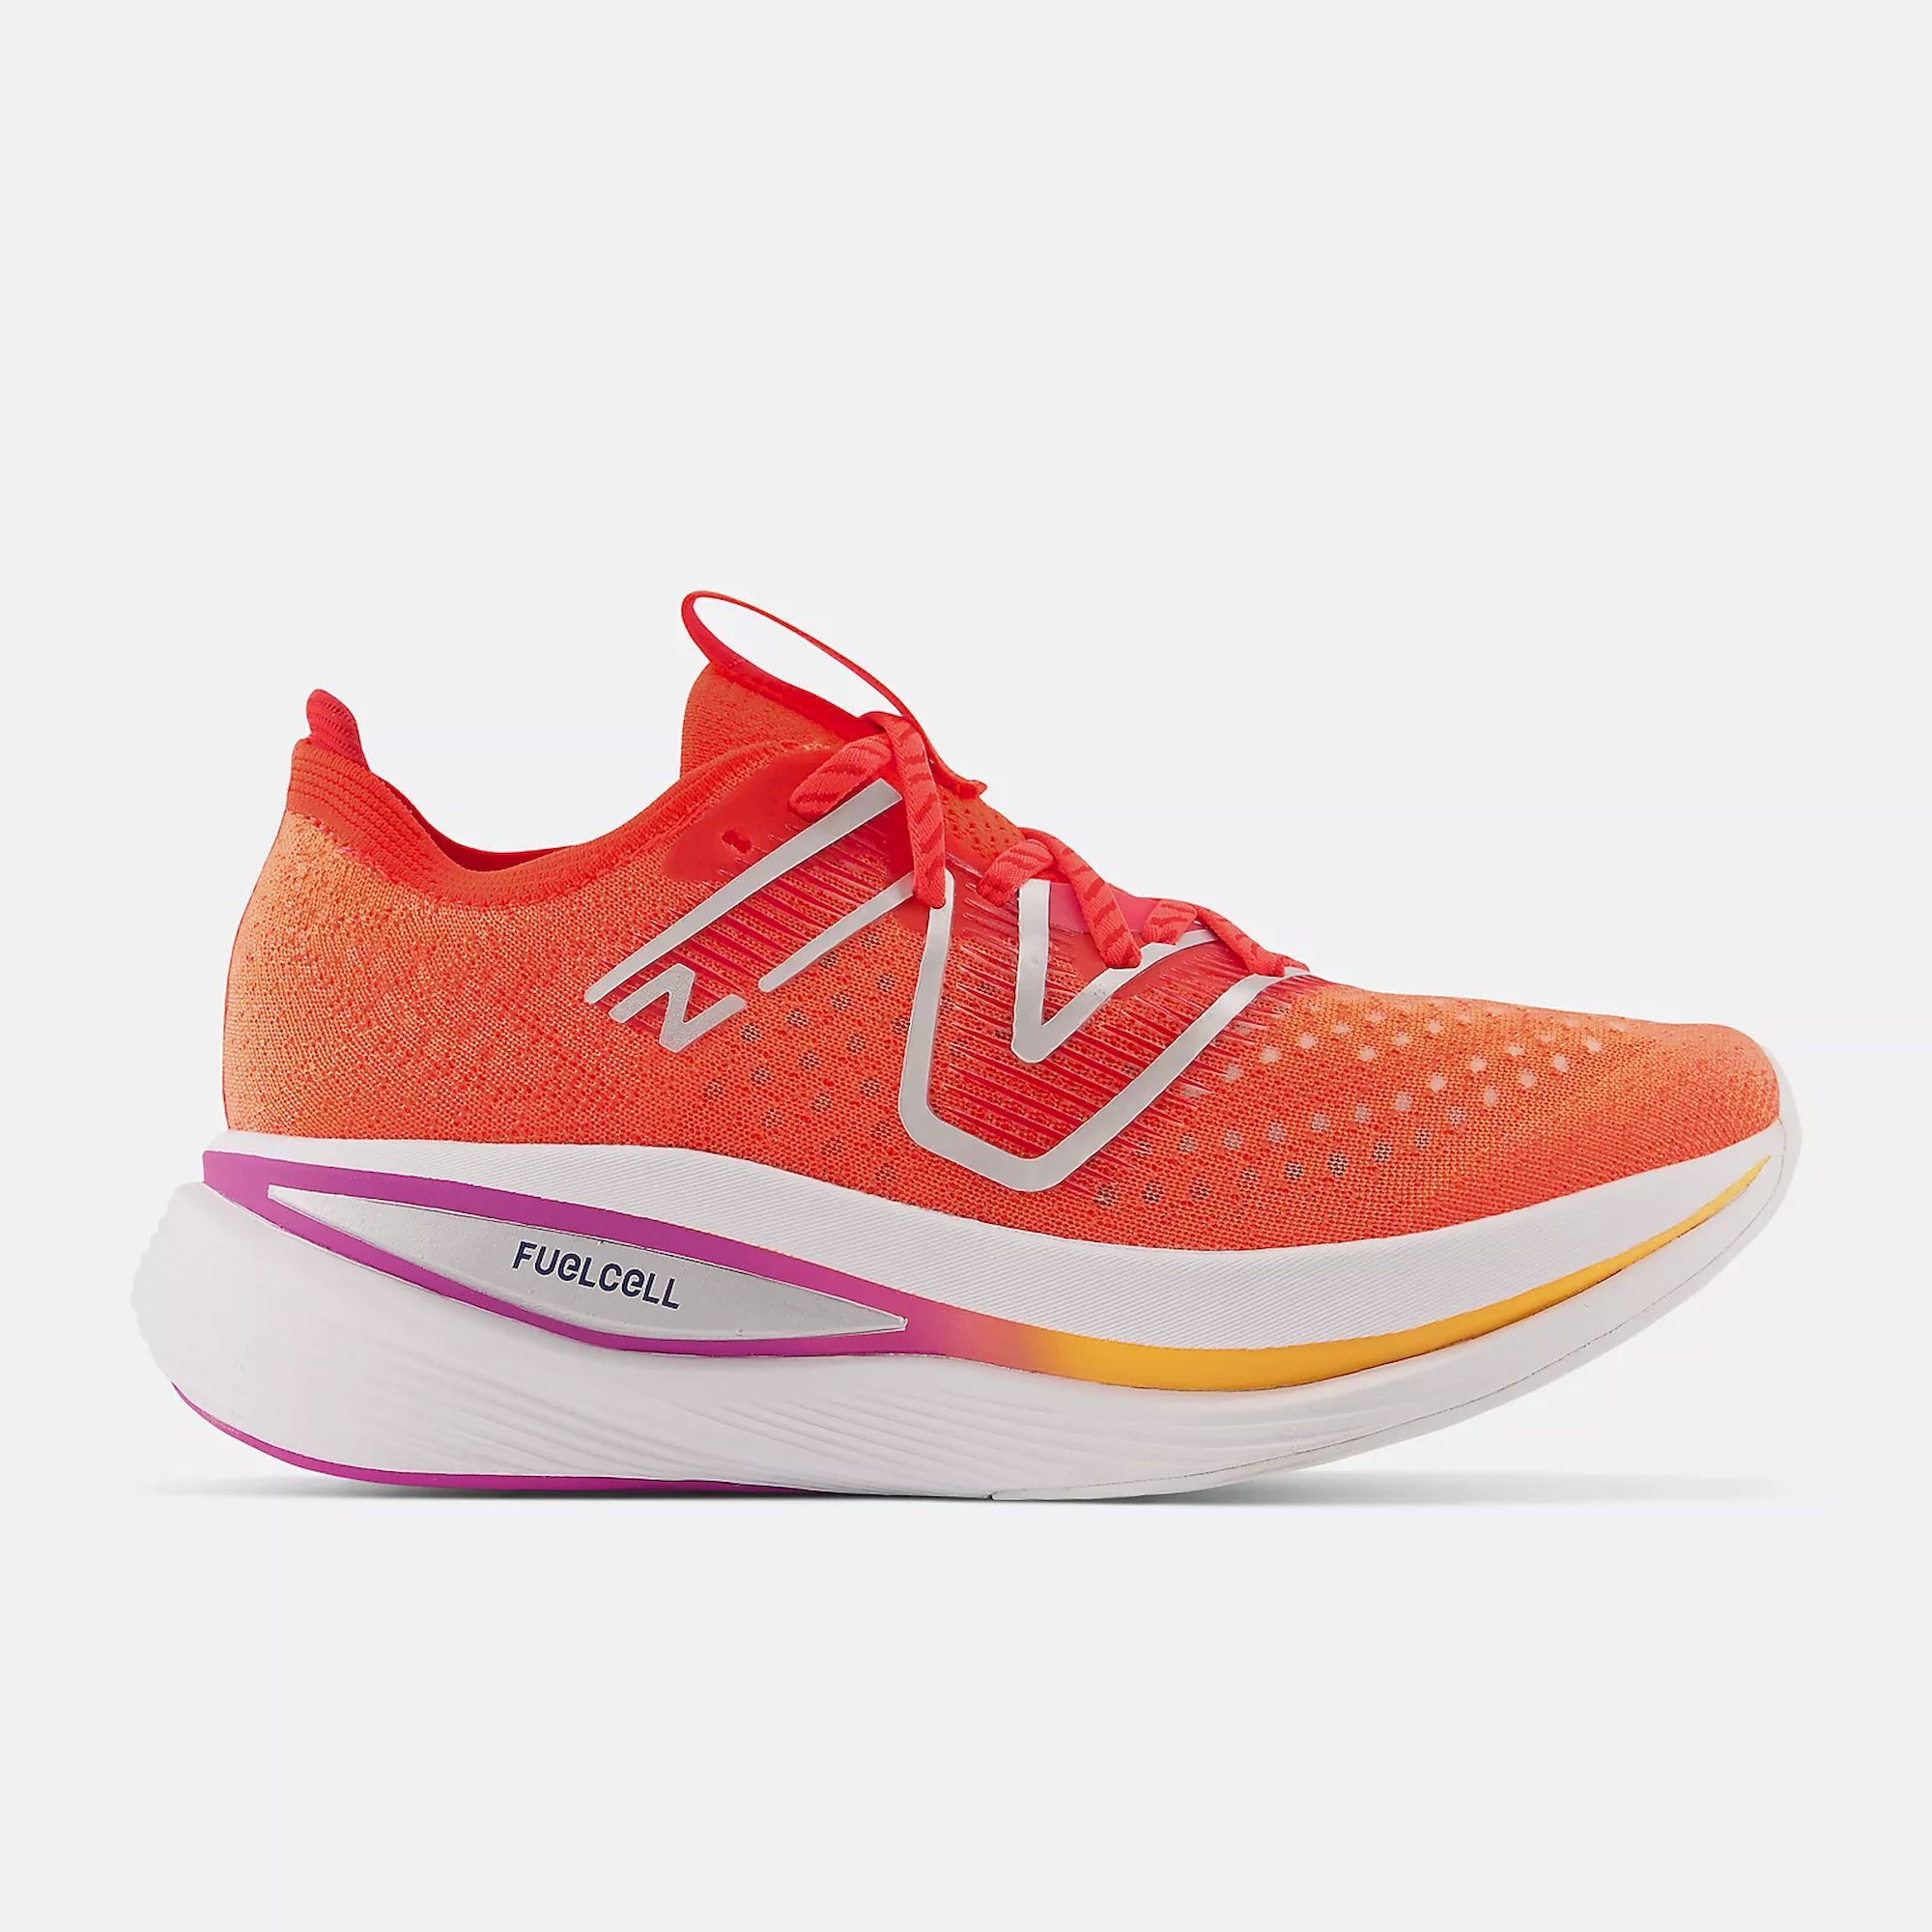 New Balance Fuelcell SC Trainer V2 - Running shoes - Women's